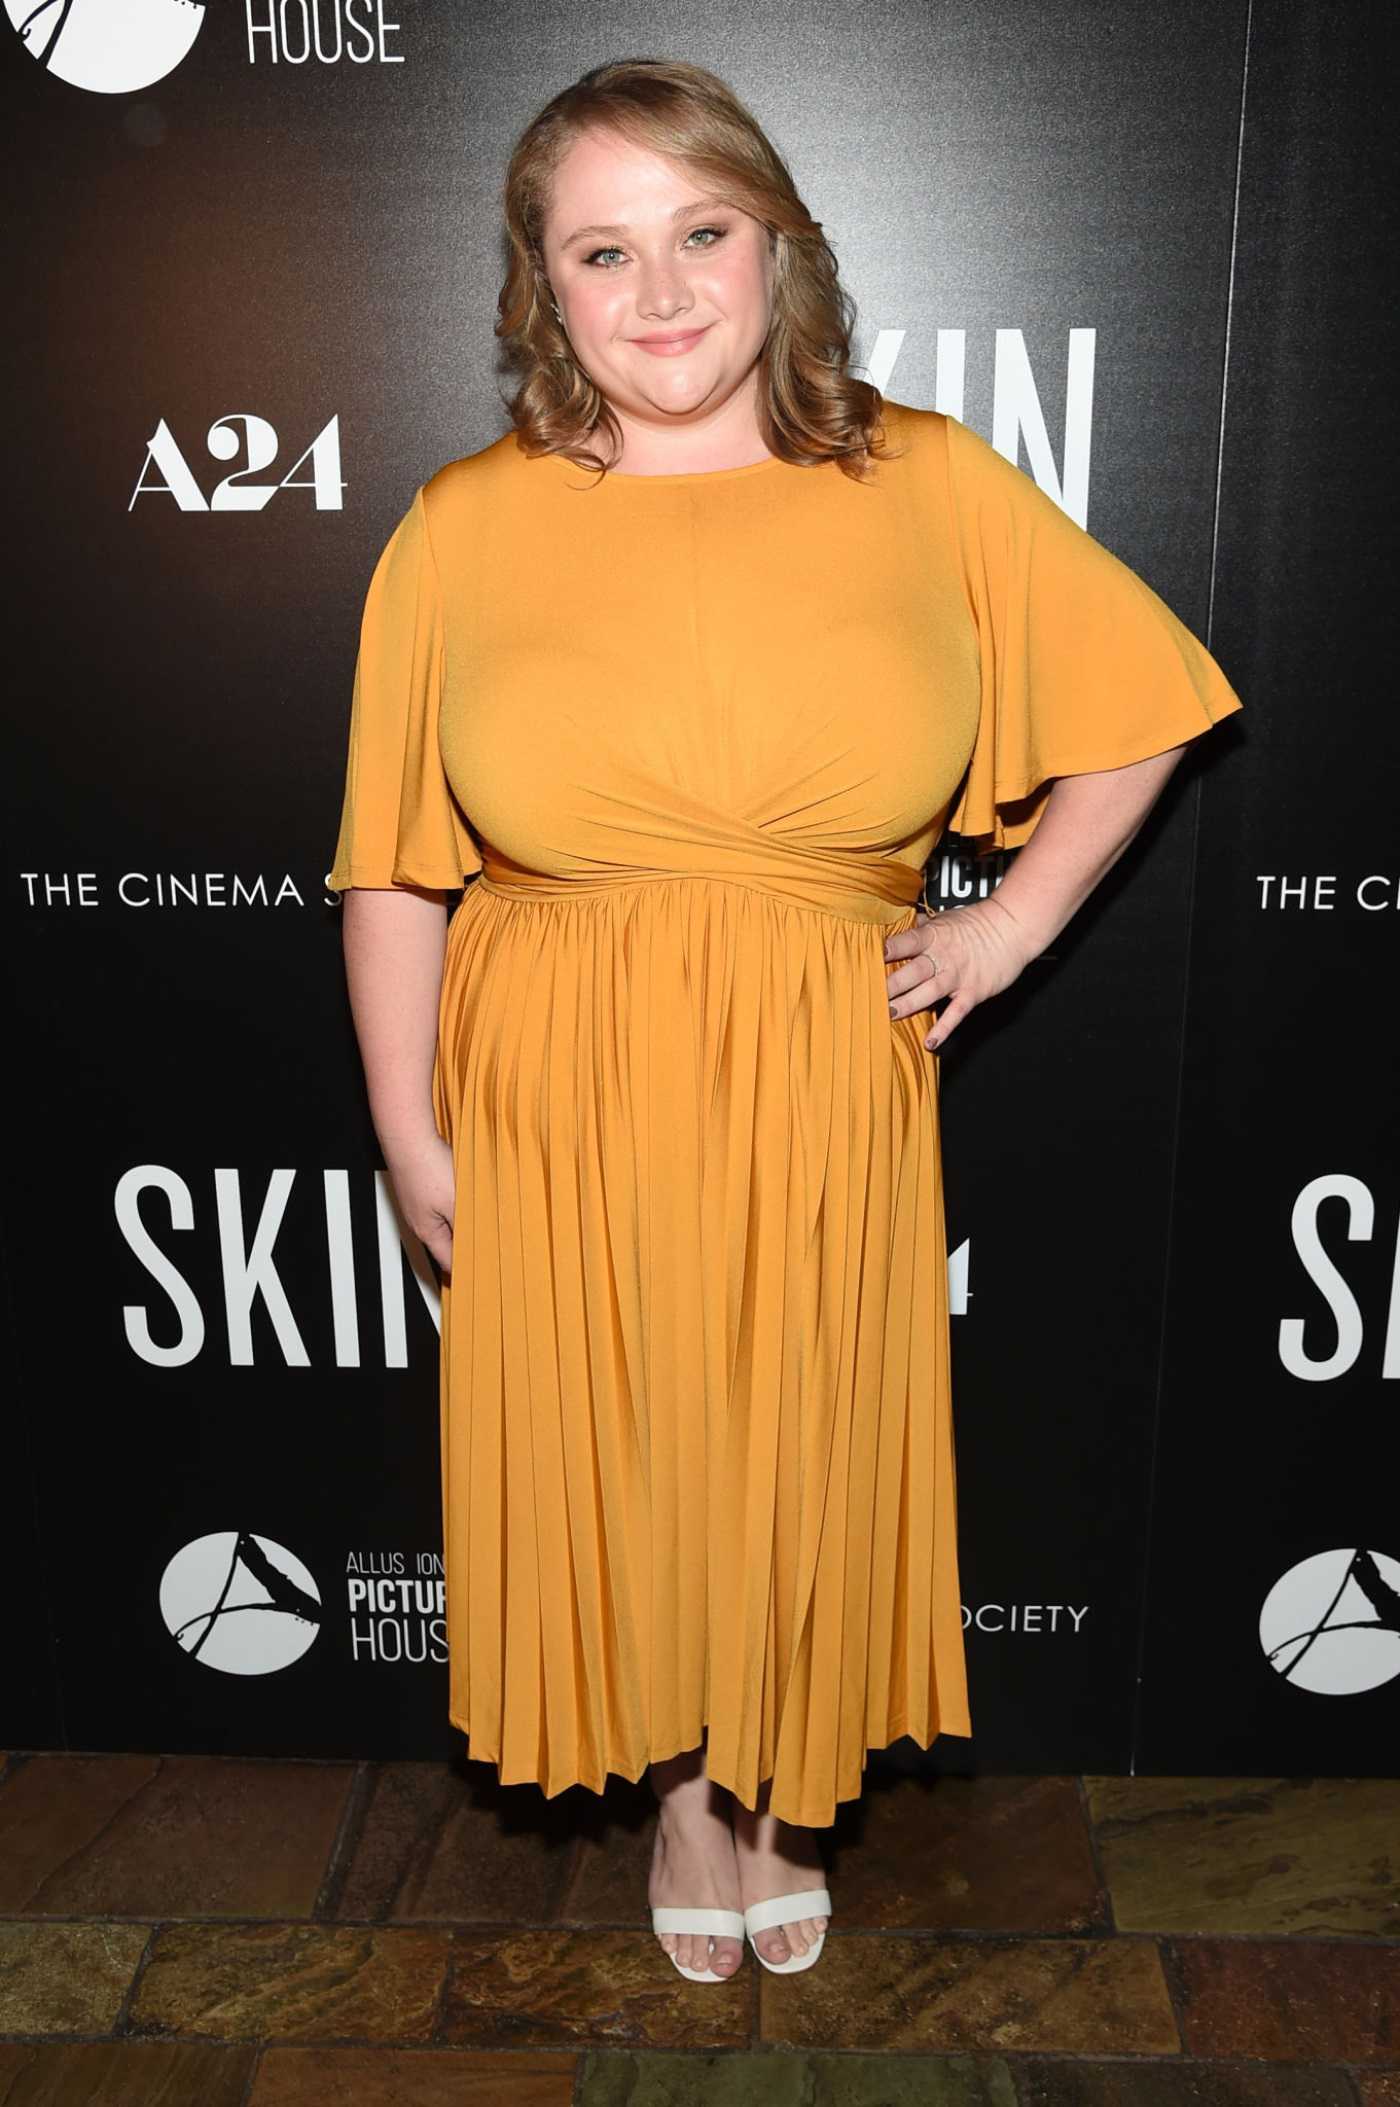 Danielle Macdonald Attends the Skin Screening at the Roxy Cinema in New York City 07/24/2019